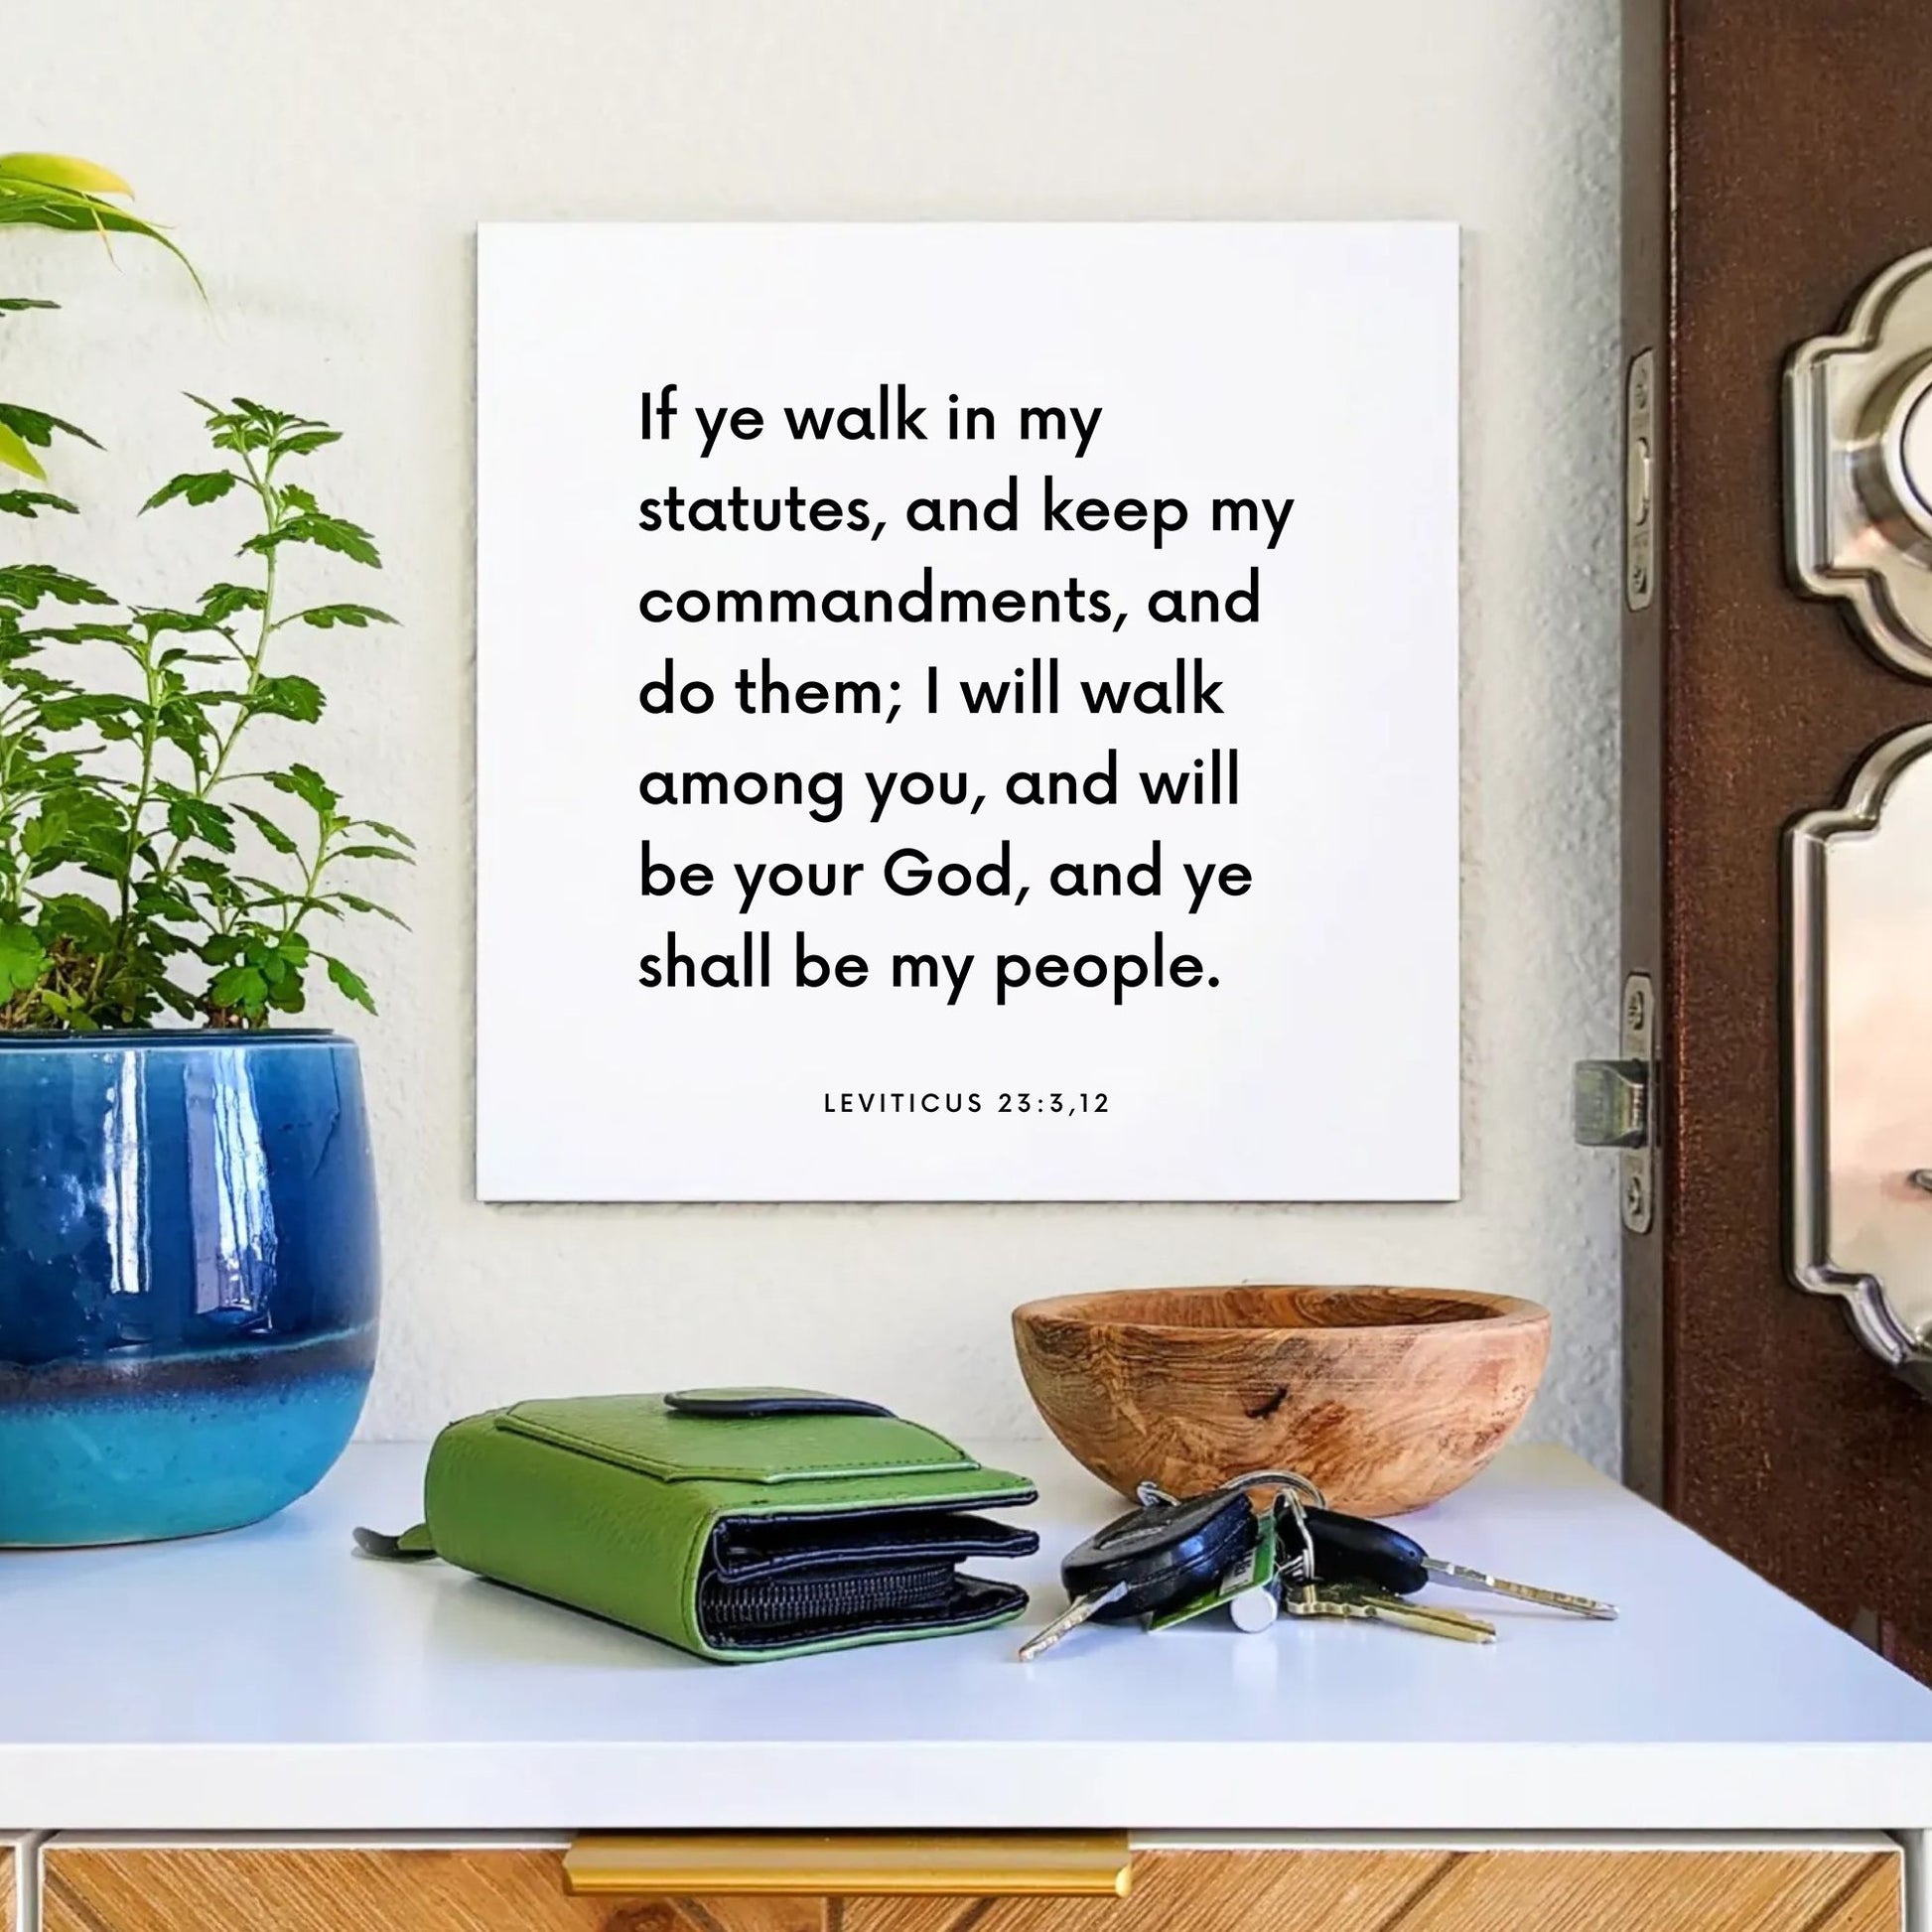 Entryway mouting of the scripture tile for Leviticus 23:3,12 - "I will walk among you, and will be your God"